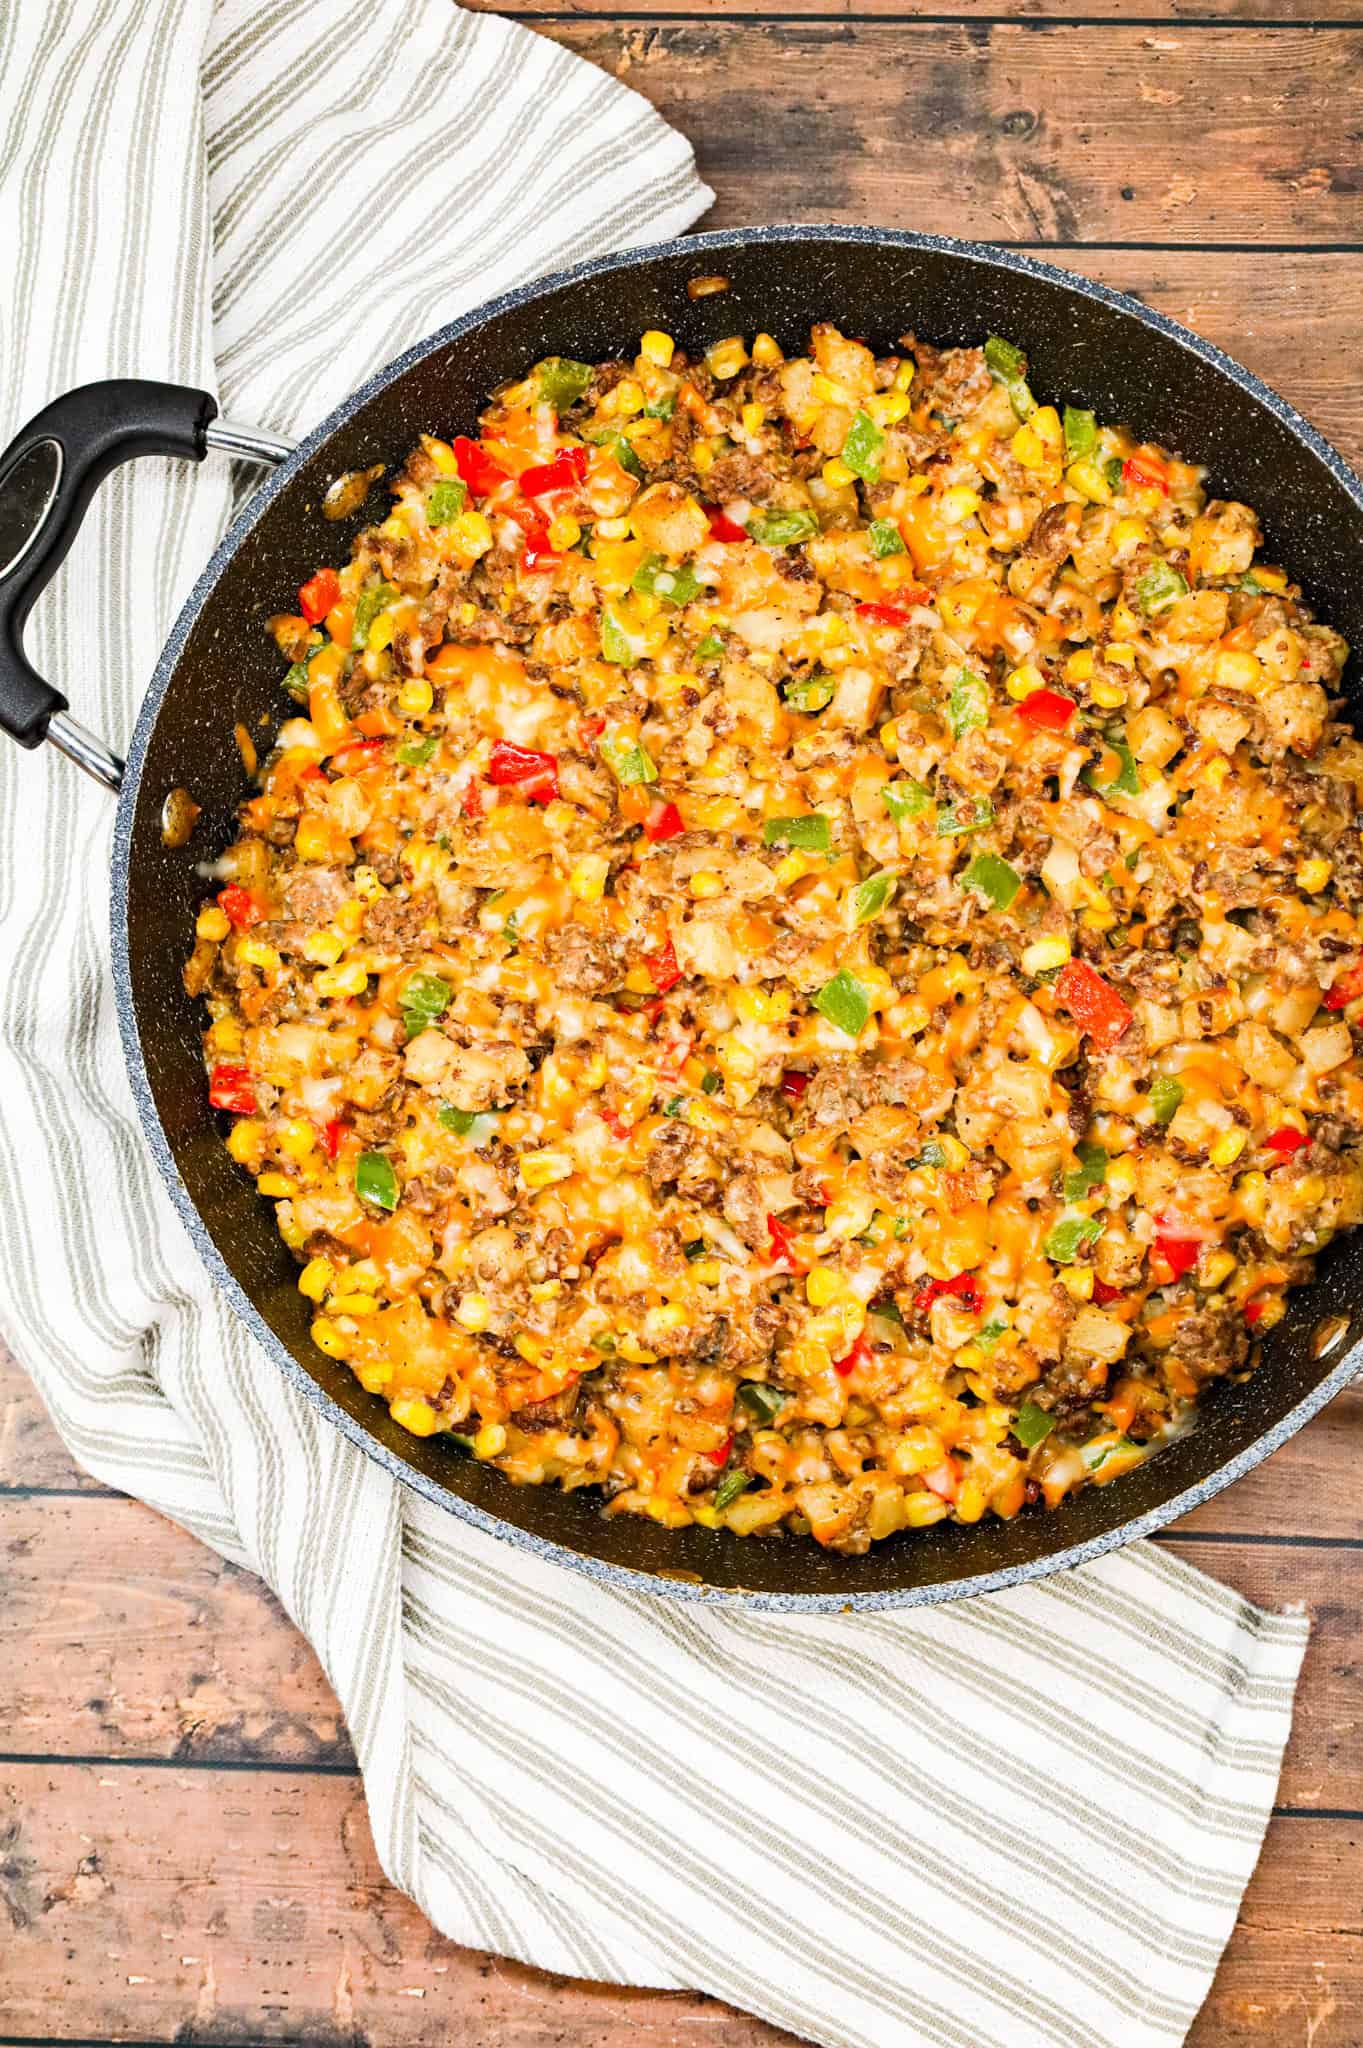 Ground Beef and Potatoes is an easy weeknight dinner recipe loaded with diced hash brown potatoes, ground beef, corn, diced bell peppers, cream of mushroom soup and shredded cheddar cheese.